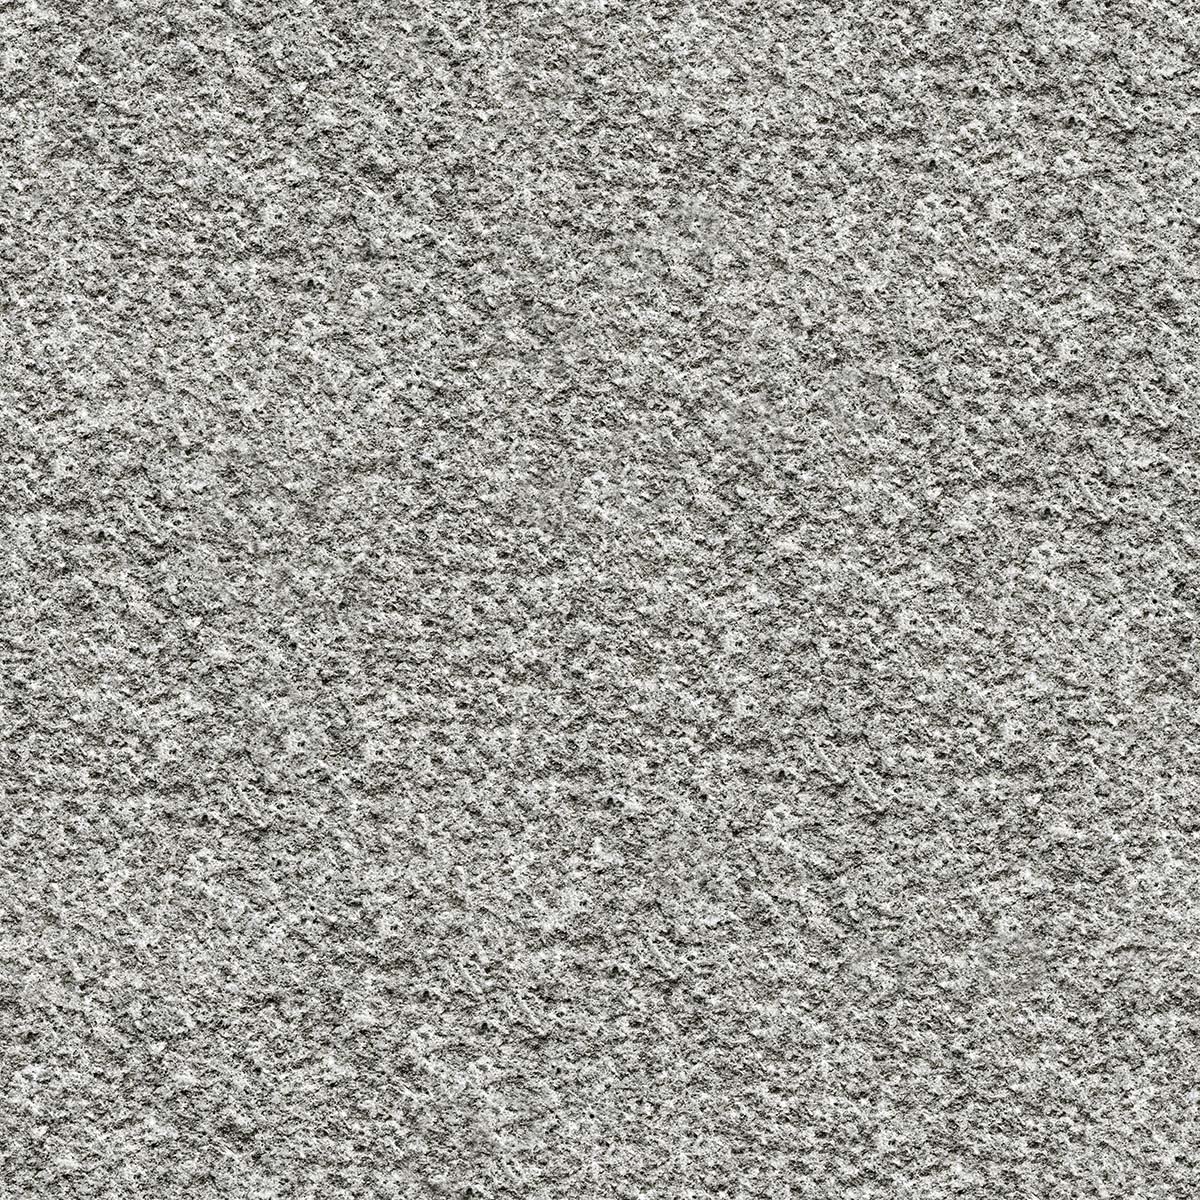 A close-up of a grey surface